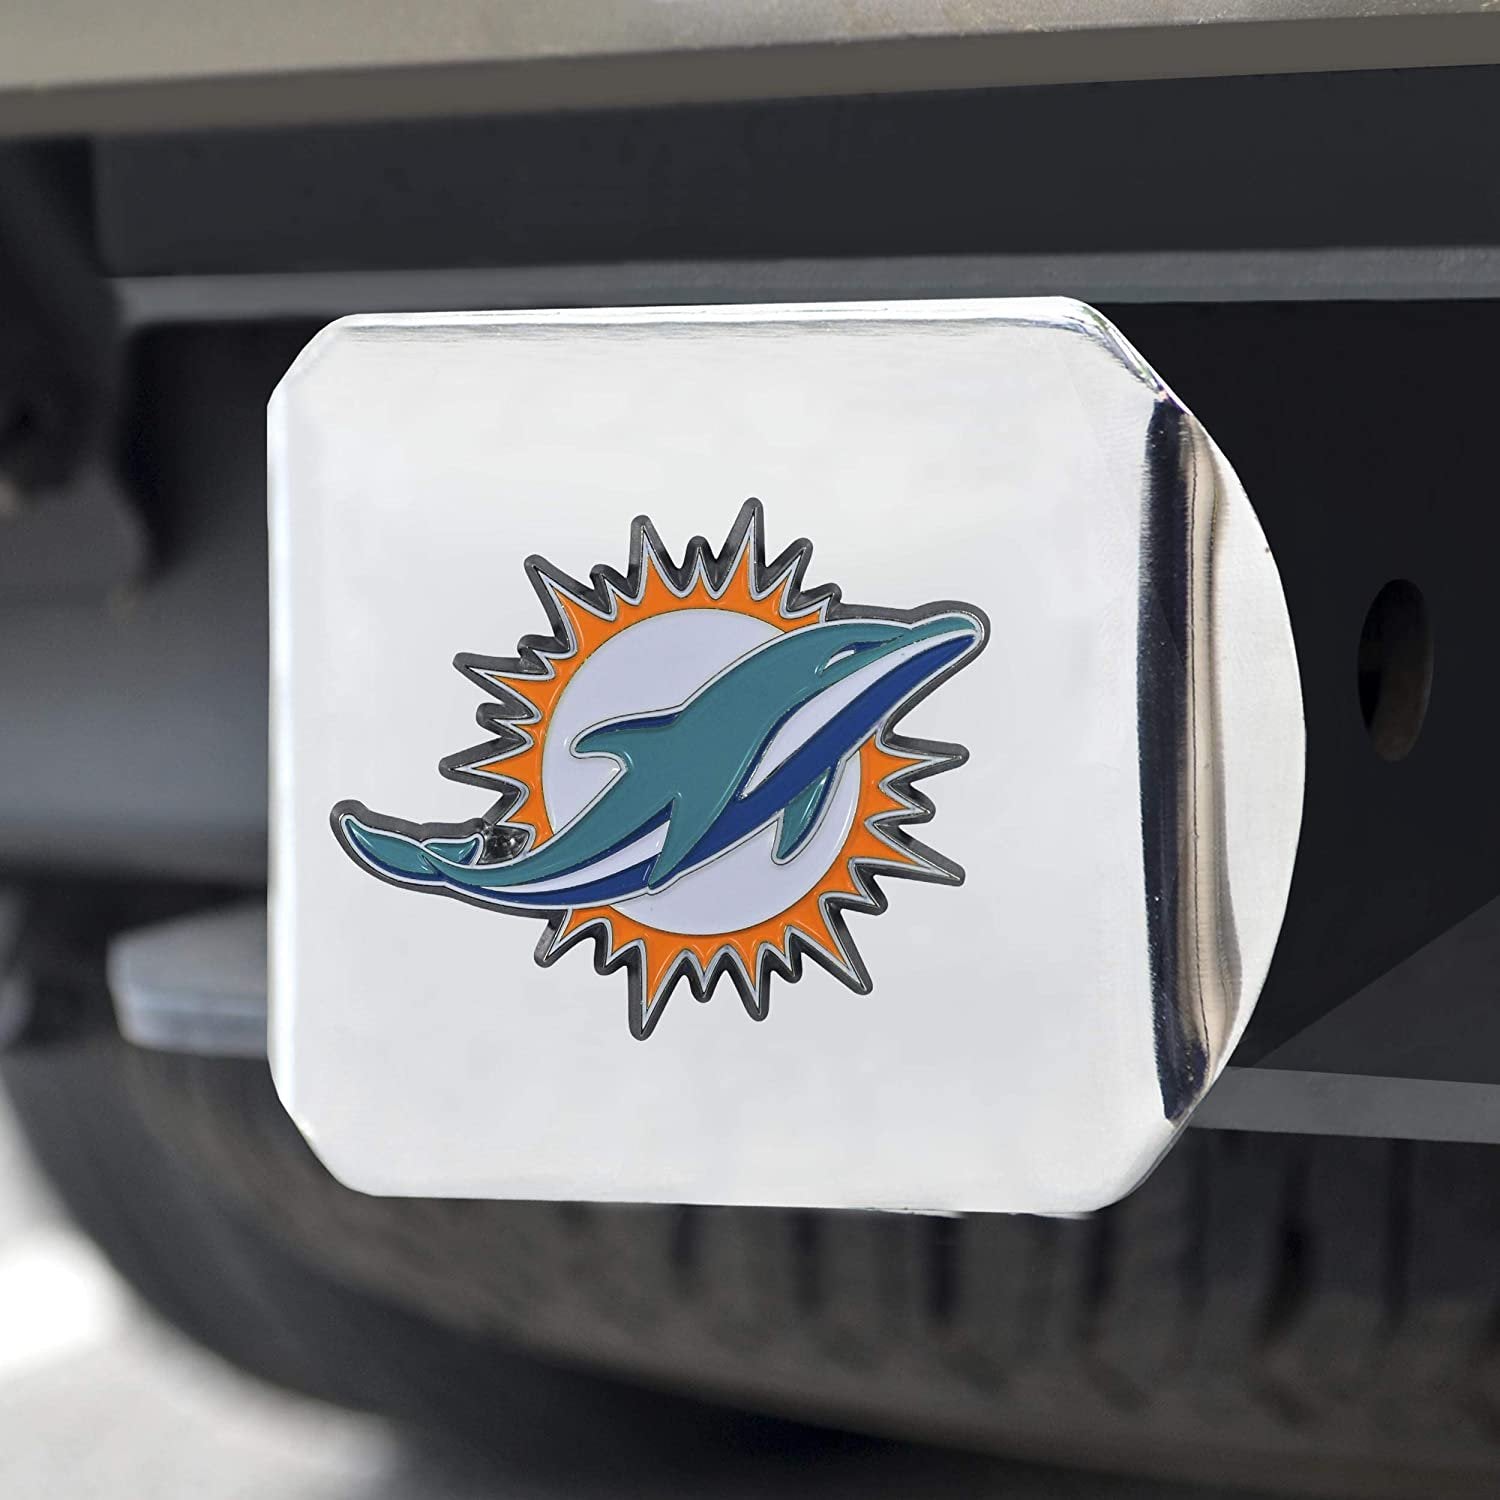 Miami Dolphins Hitch Cover Solid Metal with Raised Color Metal Emblem 2" Square Type III